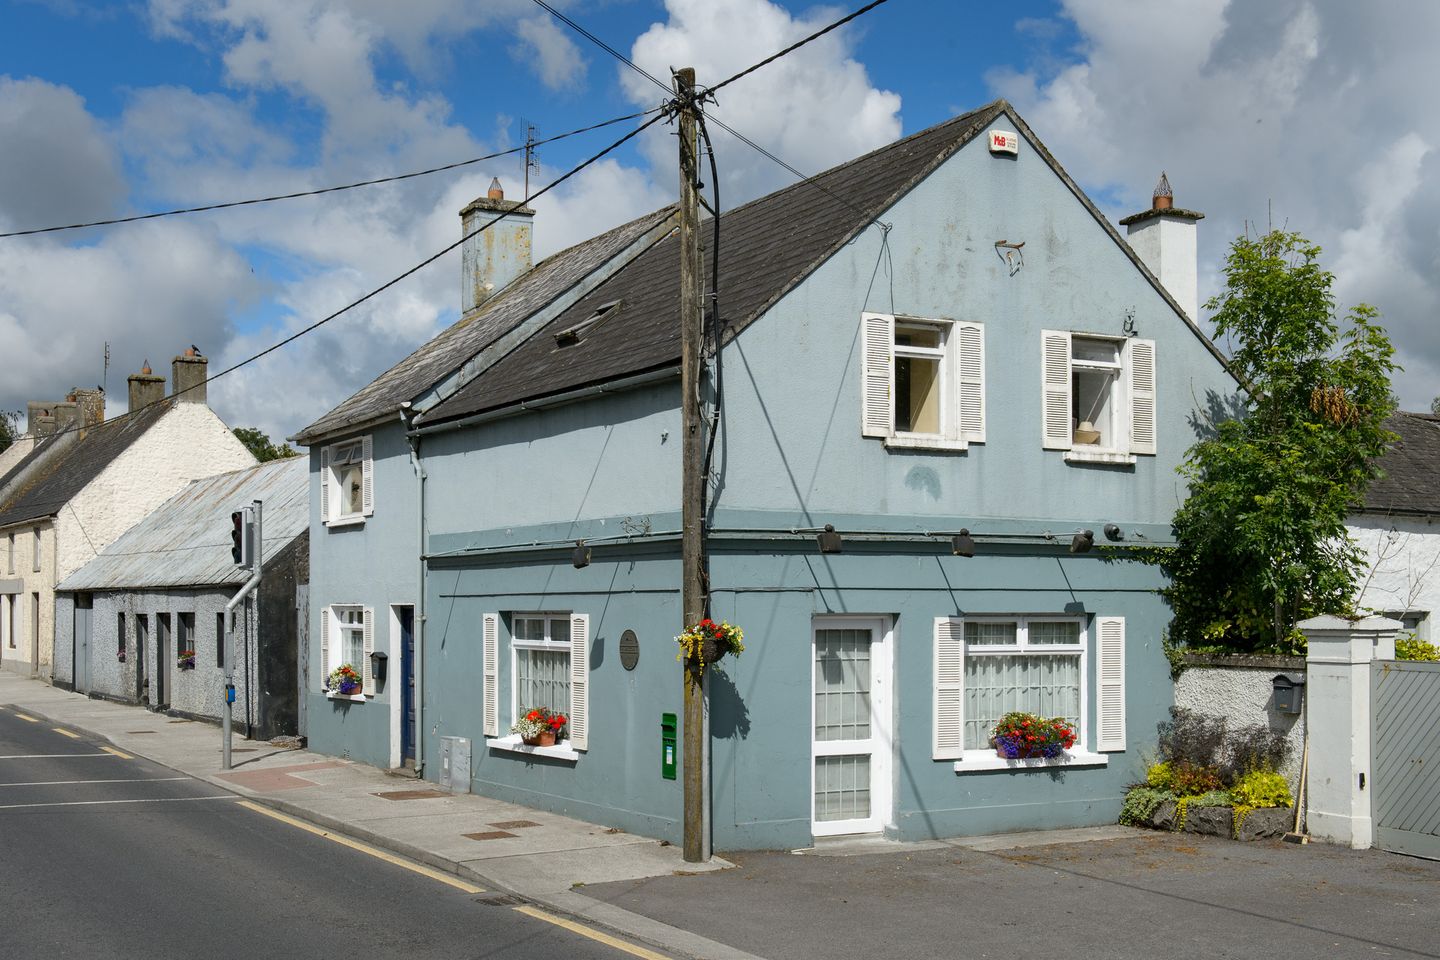 Formerly Granny's Attic Antiques, Birr, Co. Offaly